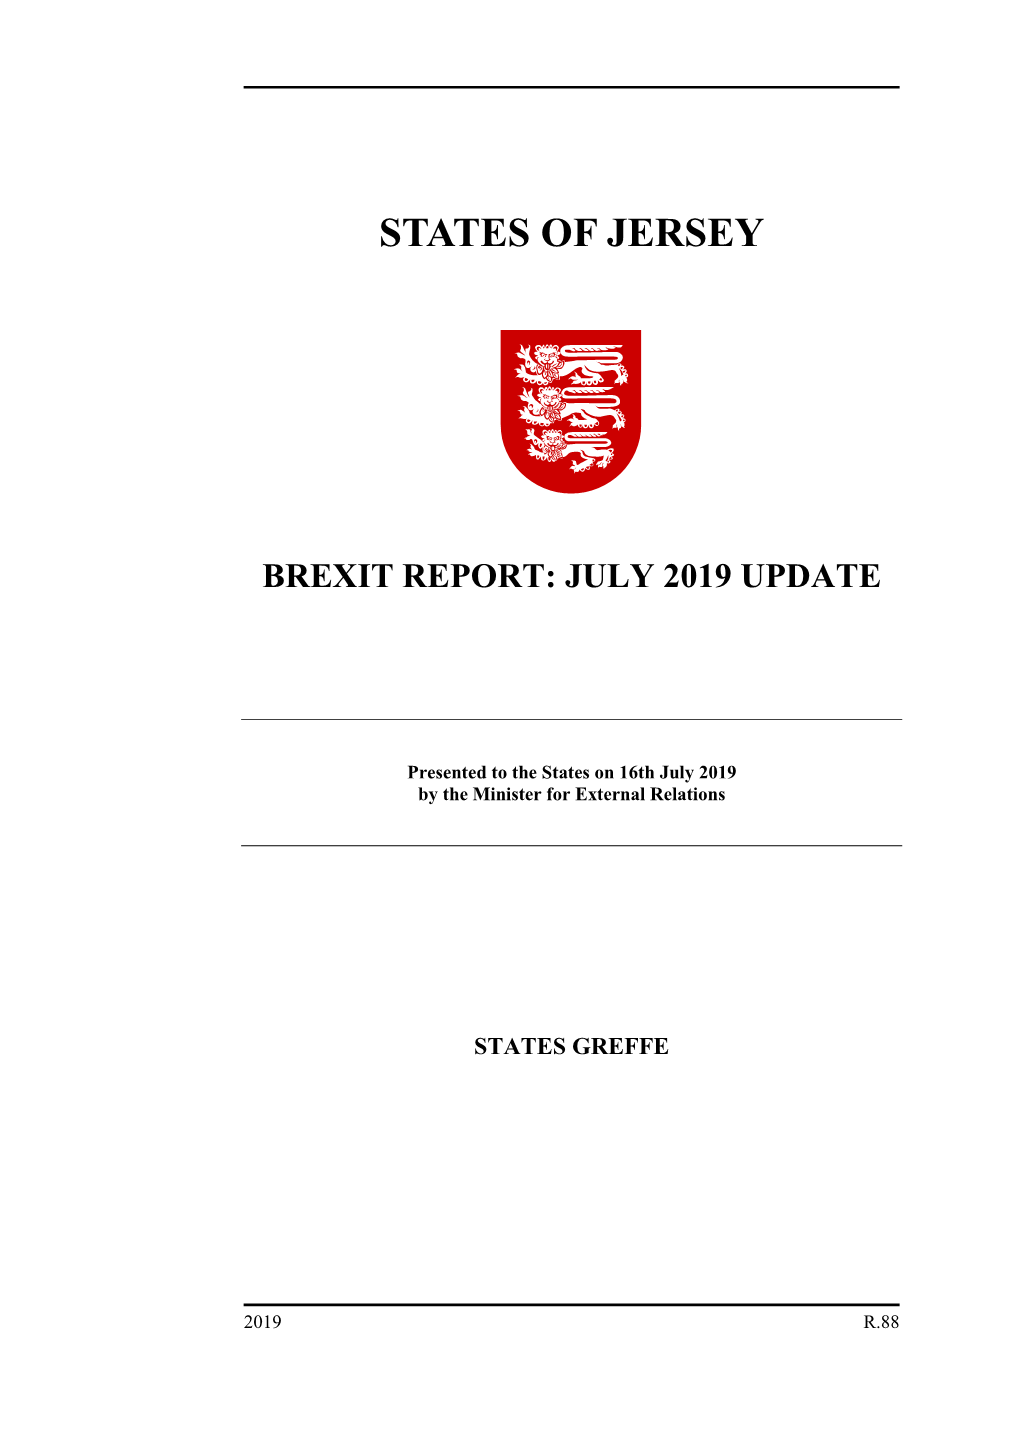 Brexit Report: July 2019 Update